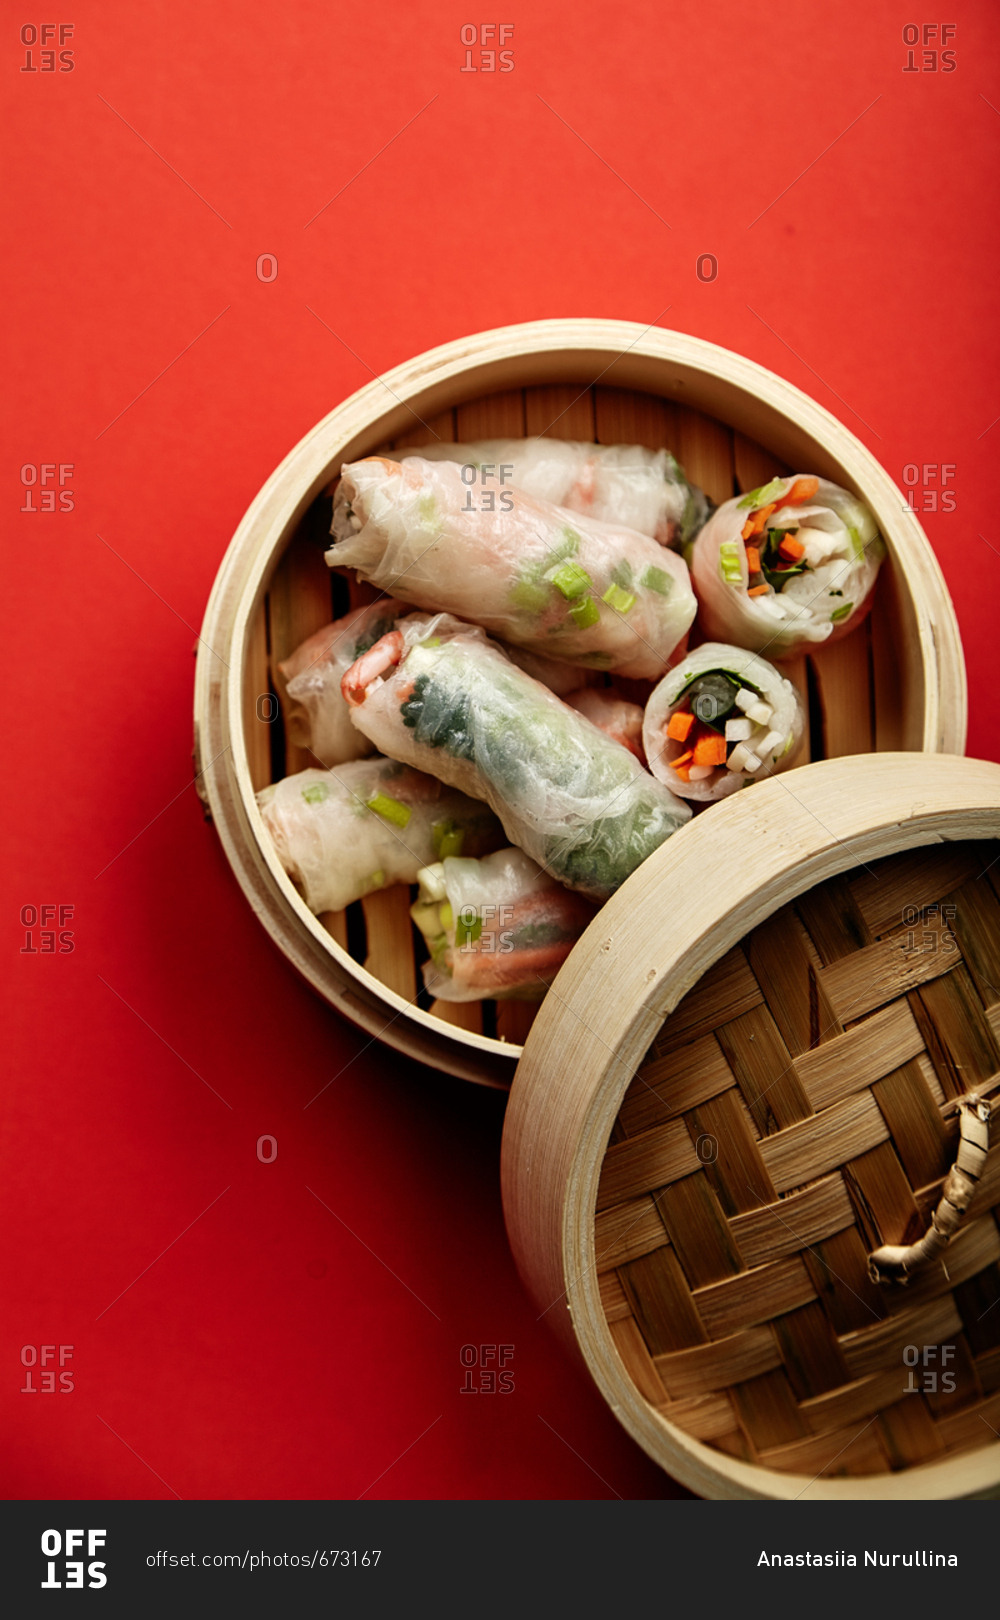 Spring rolls with shrimps and marinated vegetables in bamboo steamer on red background